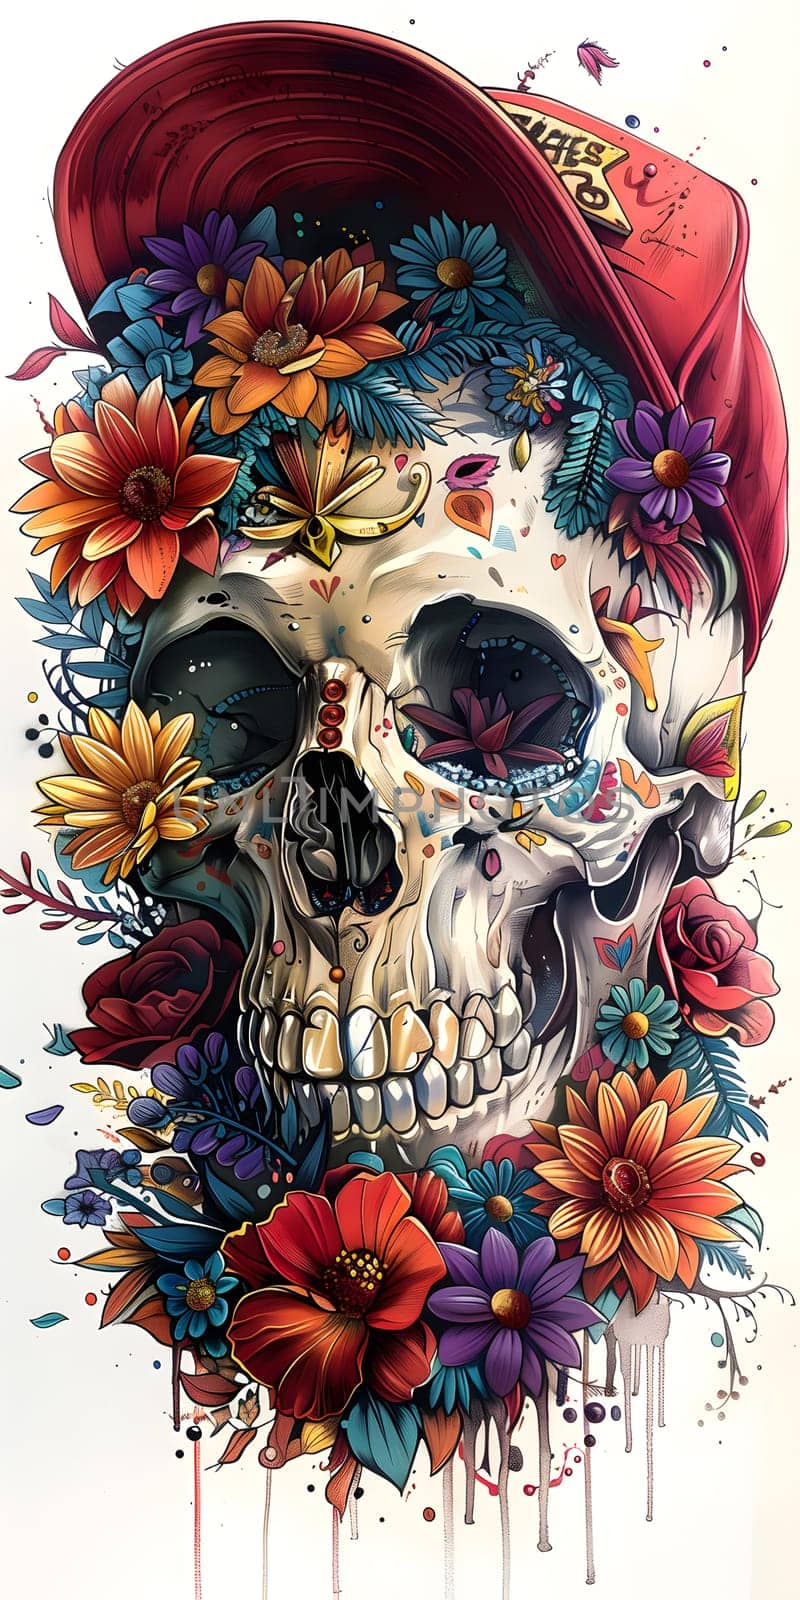 An illustration of a sugar skull wearing a red hat is beautifully surrounded by vibrant flowers, creating a striking piece of art with a unique blend of bone and flower arranging elements